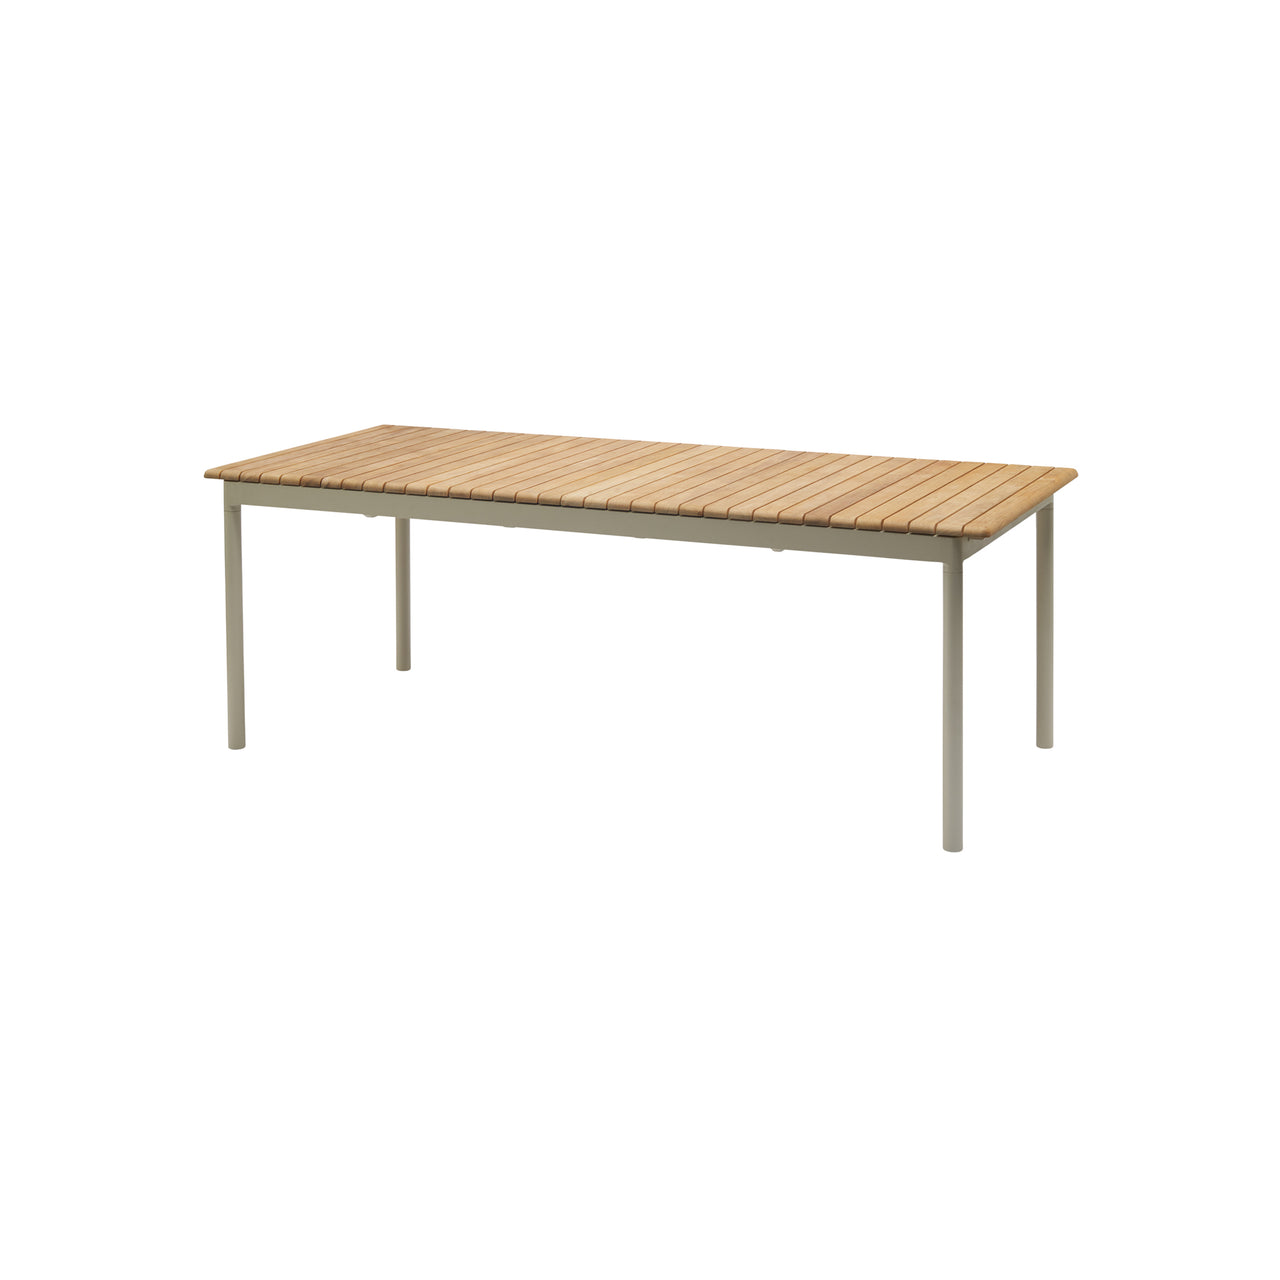 Pelagus Table: Light Ivory + Without Extension Plate